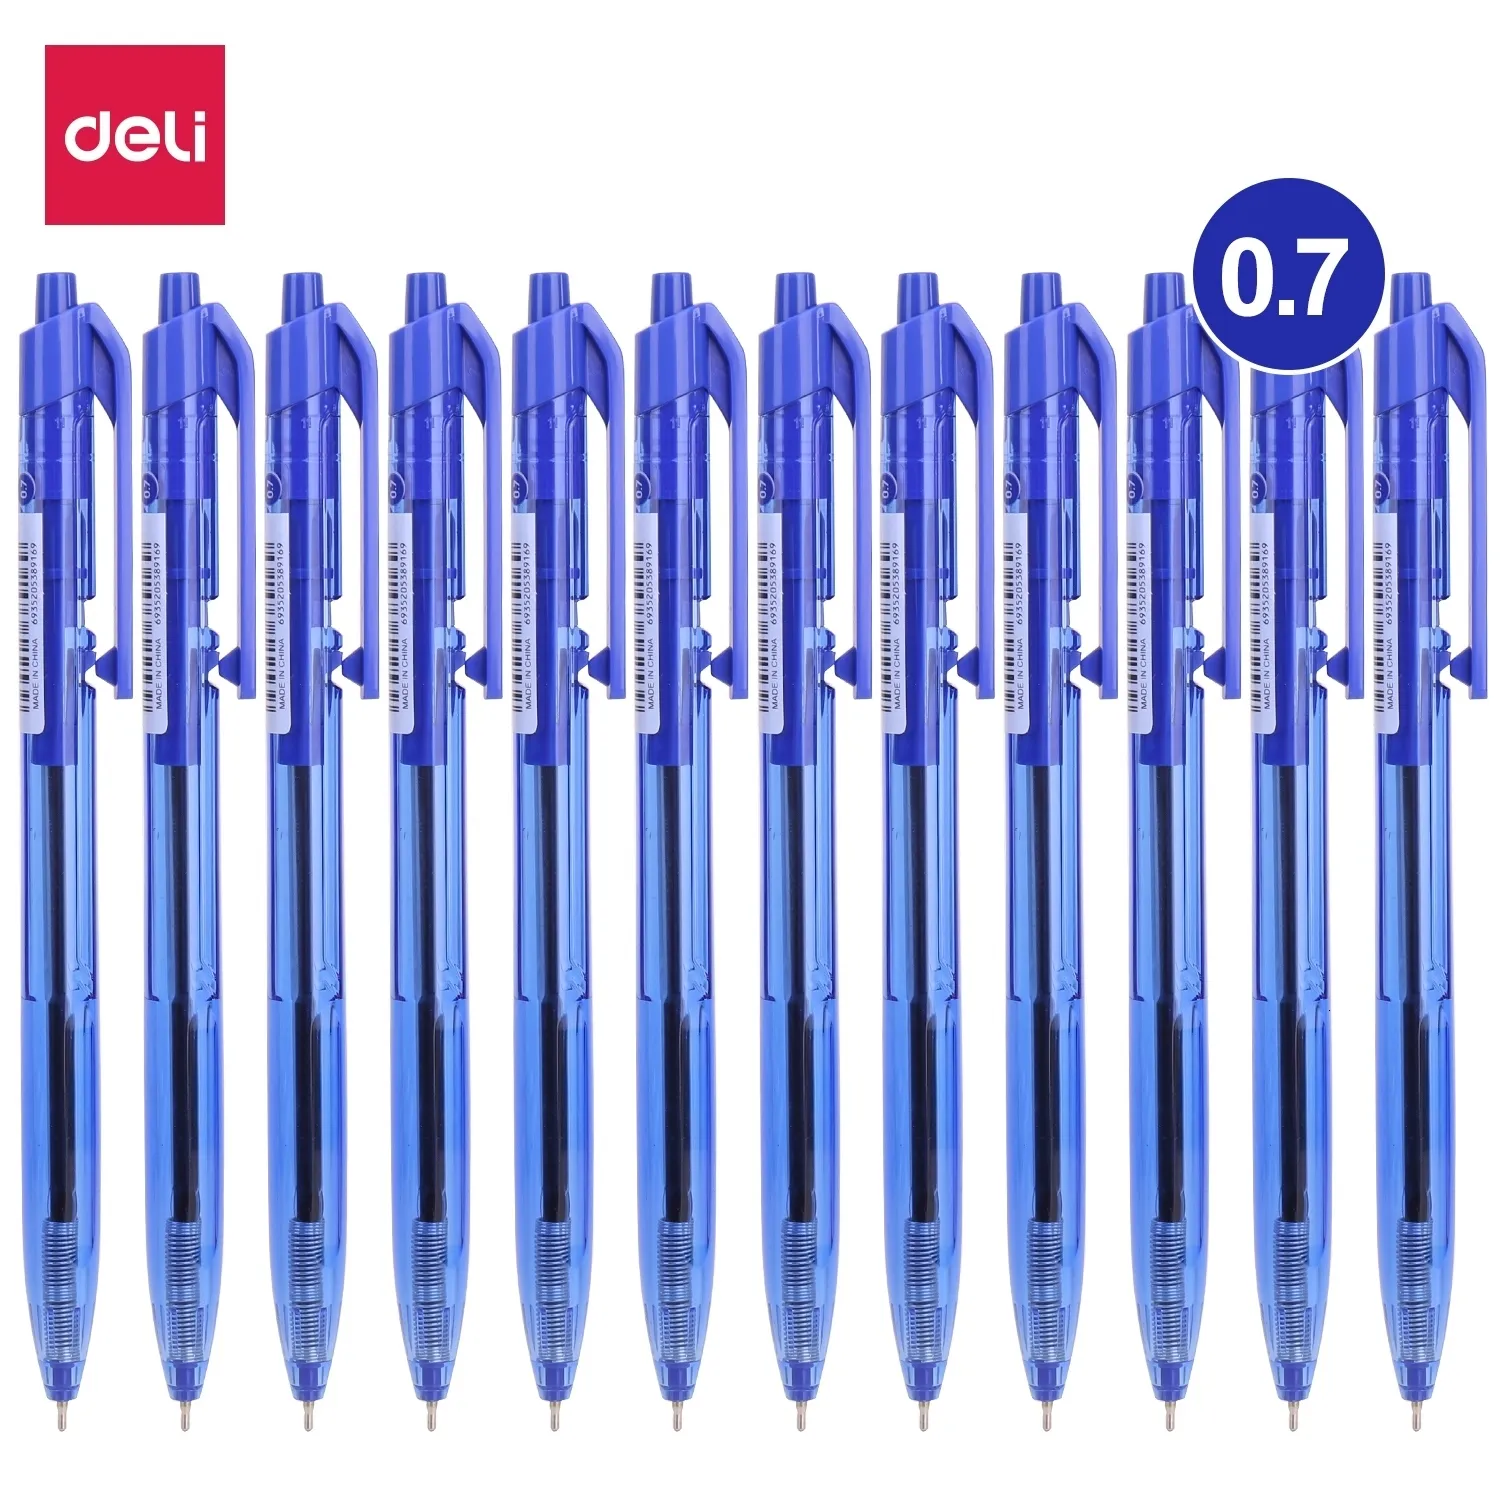 Wholesale Deli Box Of 0.7mm Slim Ballpoint Pen For Smoothing Writing, Low  Viscosity Ink, Ideal For Office Stationery 230721 From Kong08, $8.3